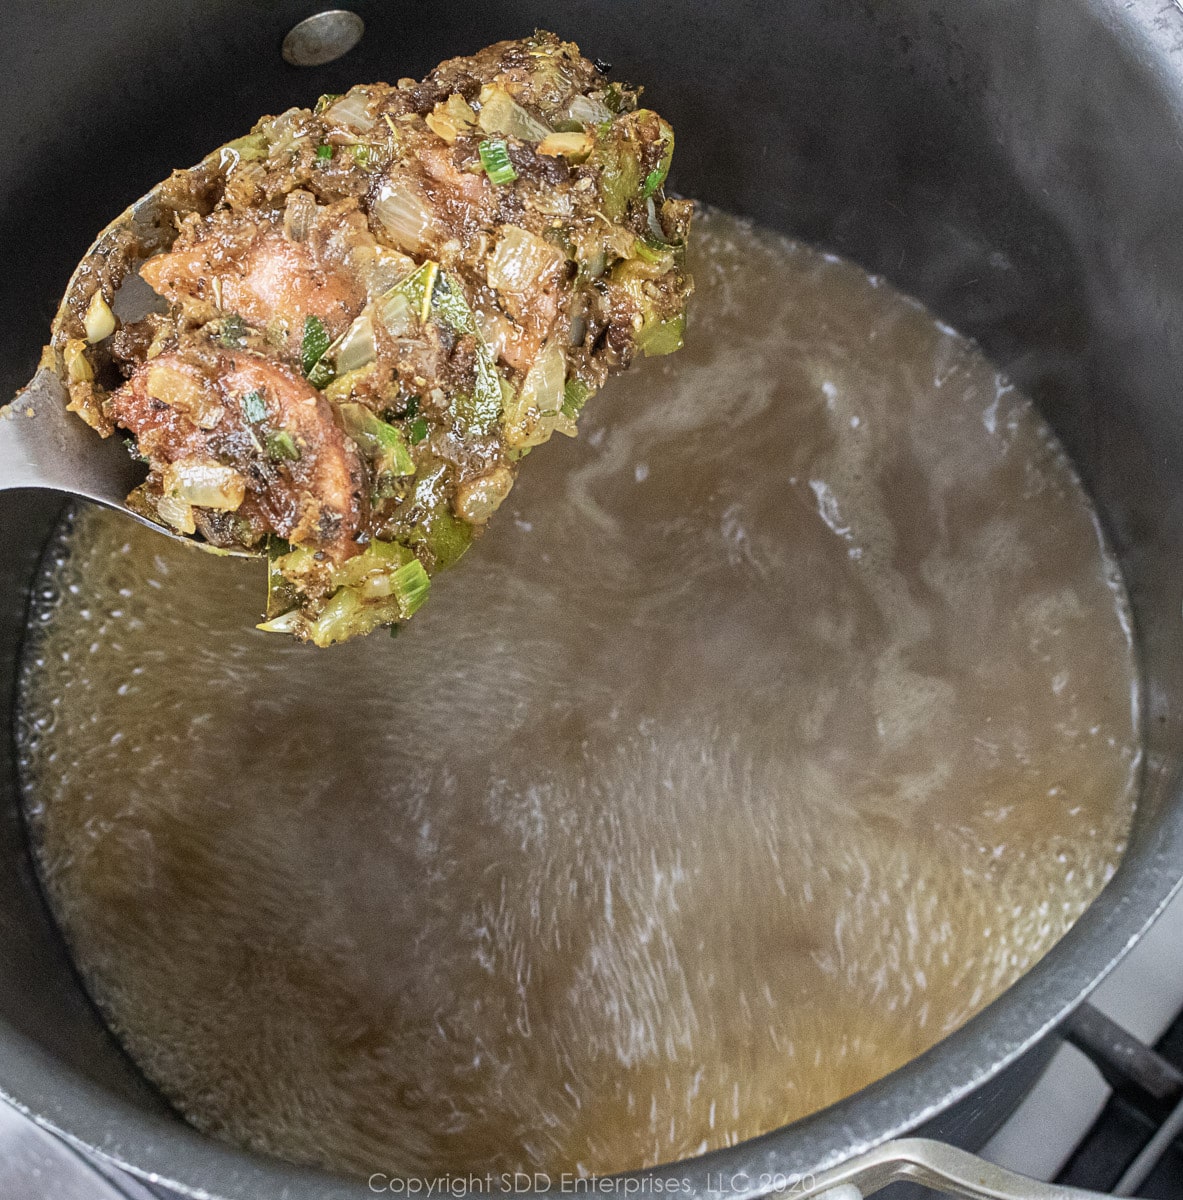 a spoonful of roux/veggie mix being added to a stock in a stockpot